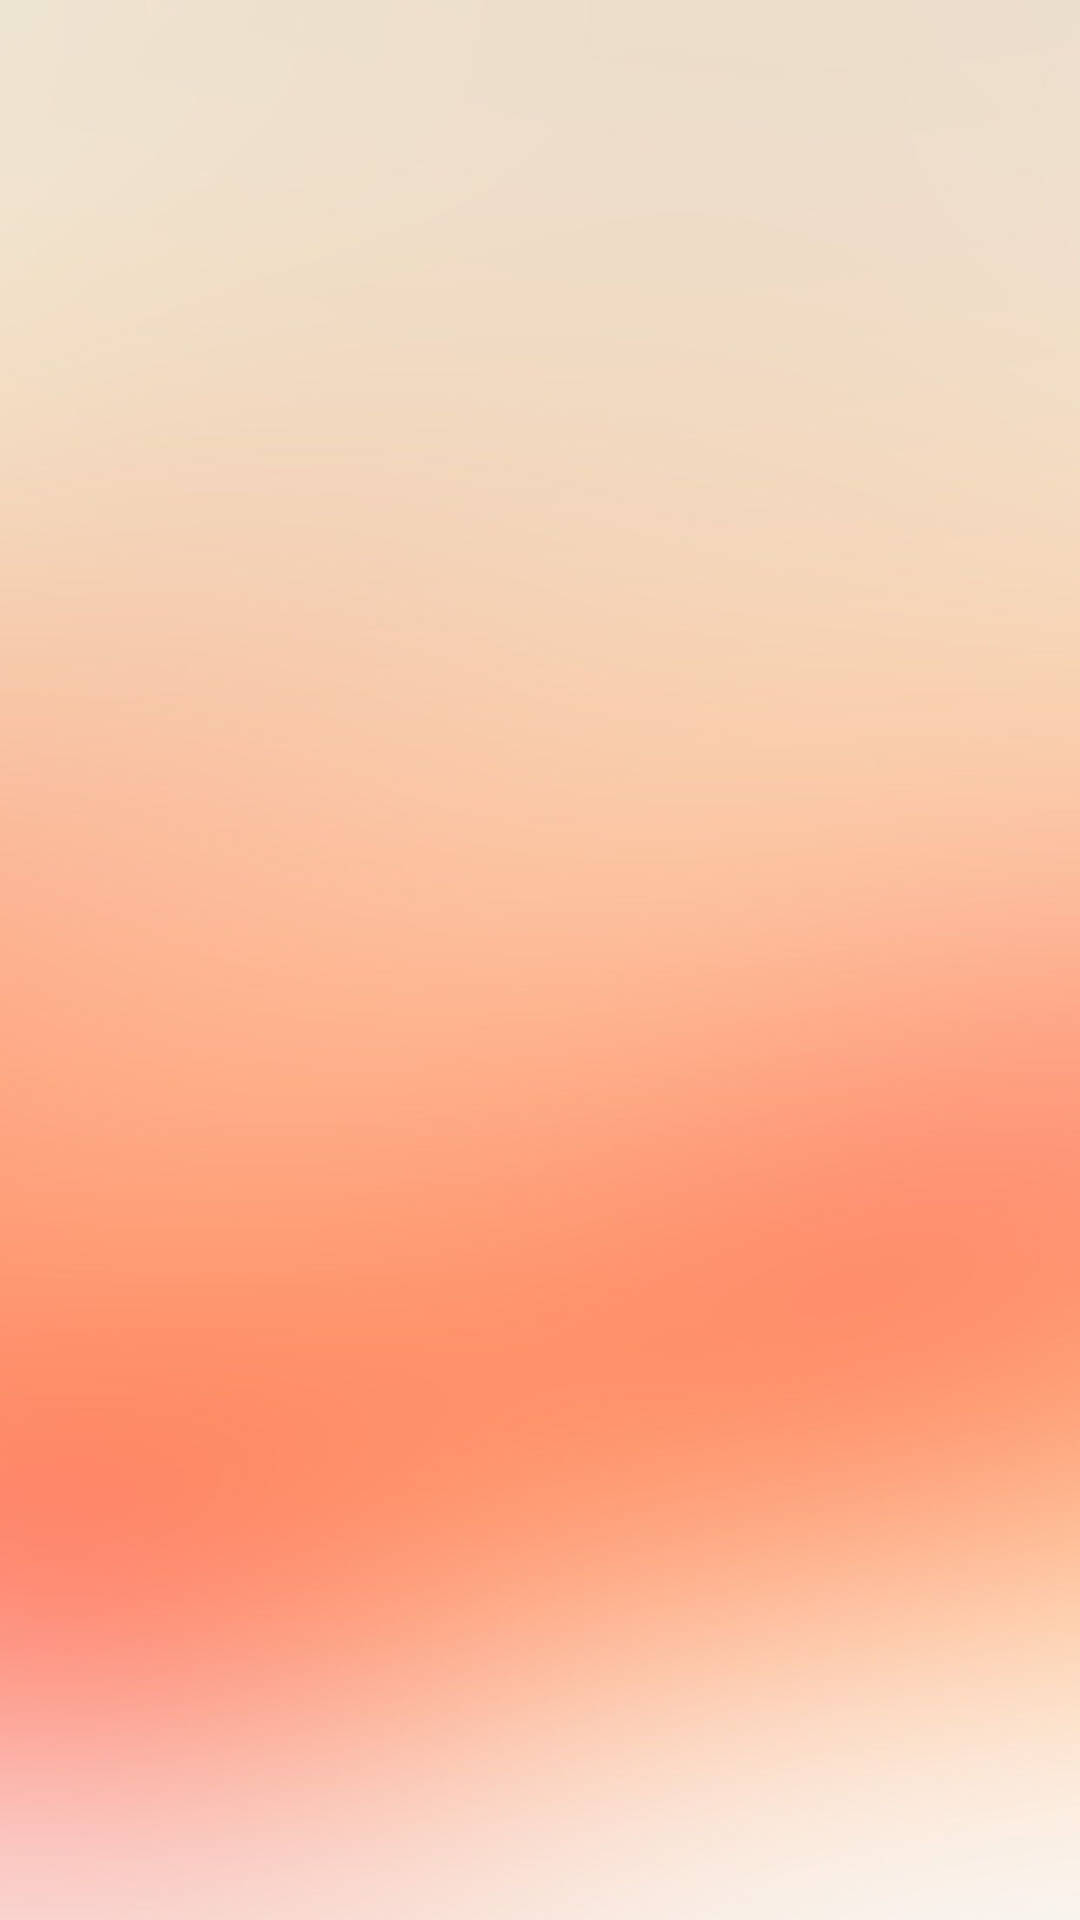 Peach And White Gradient Background